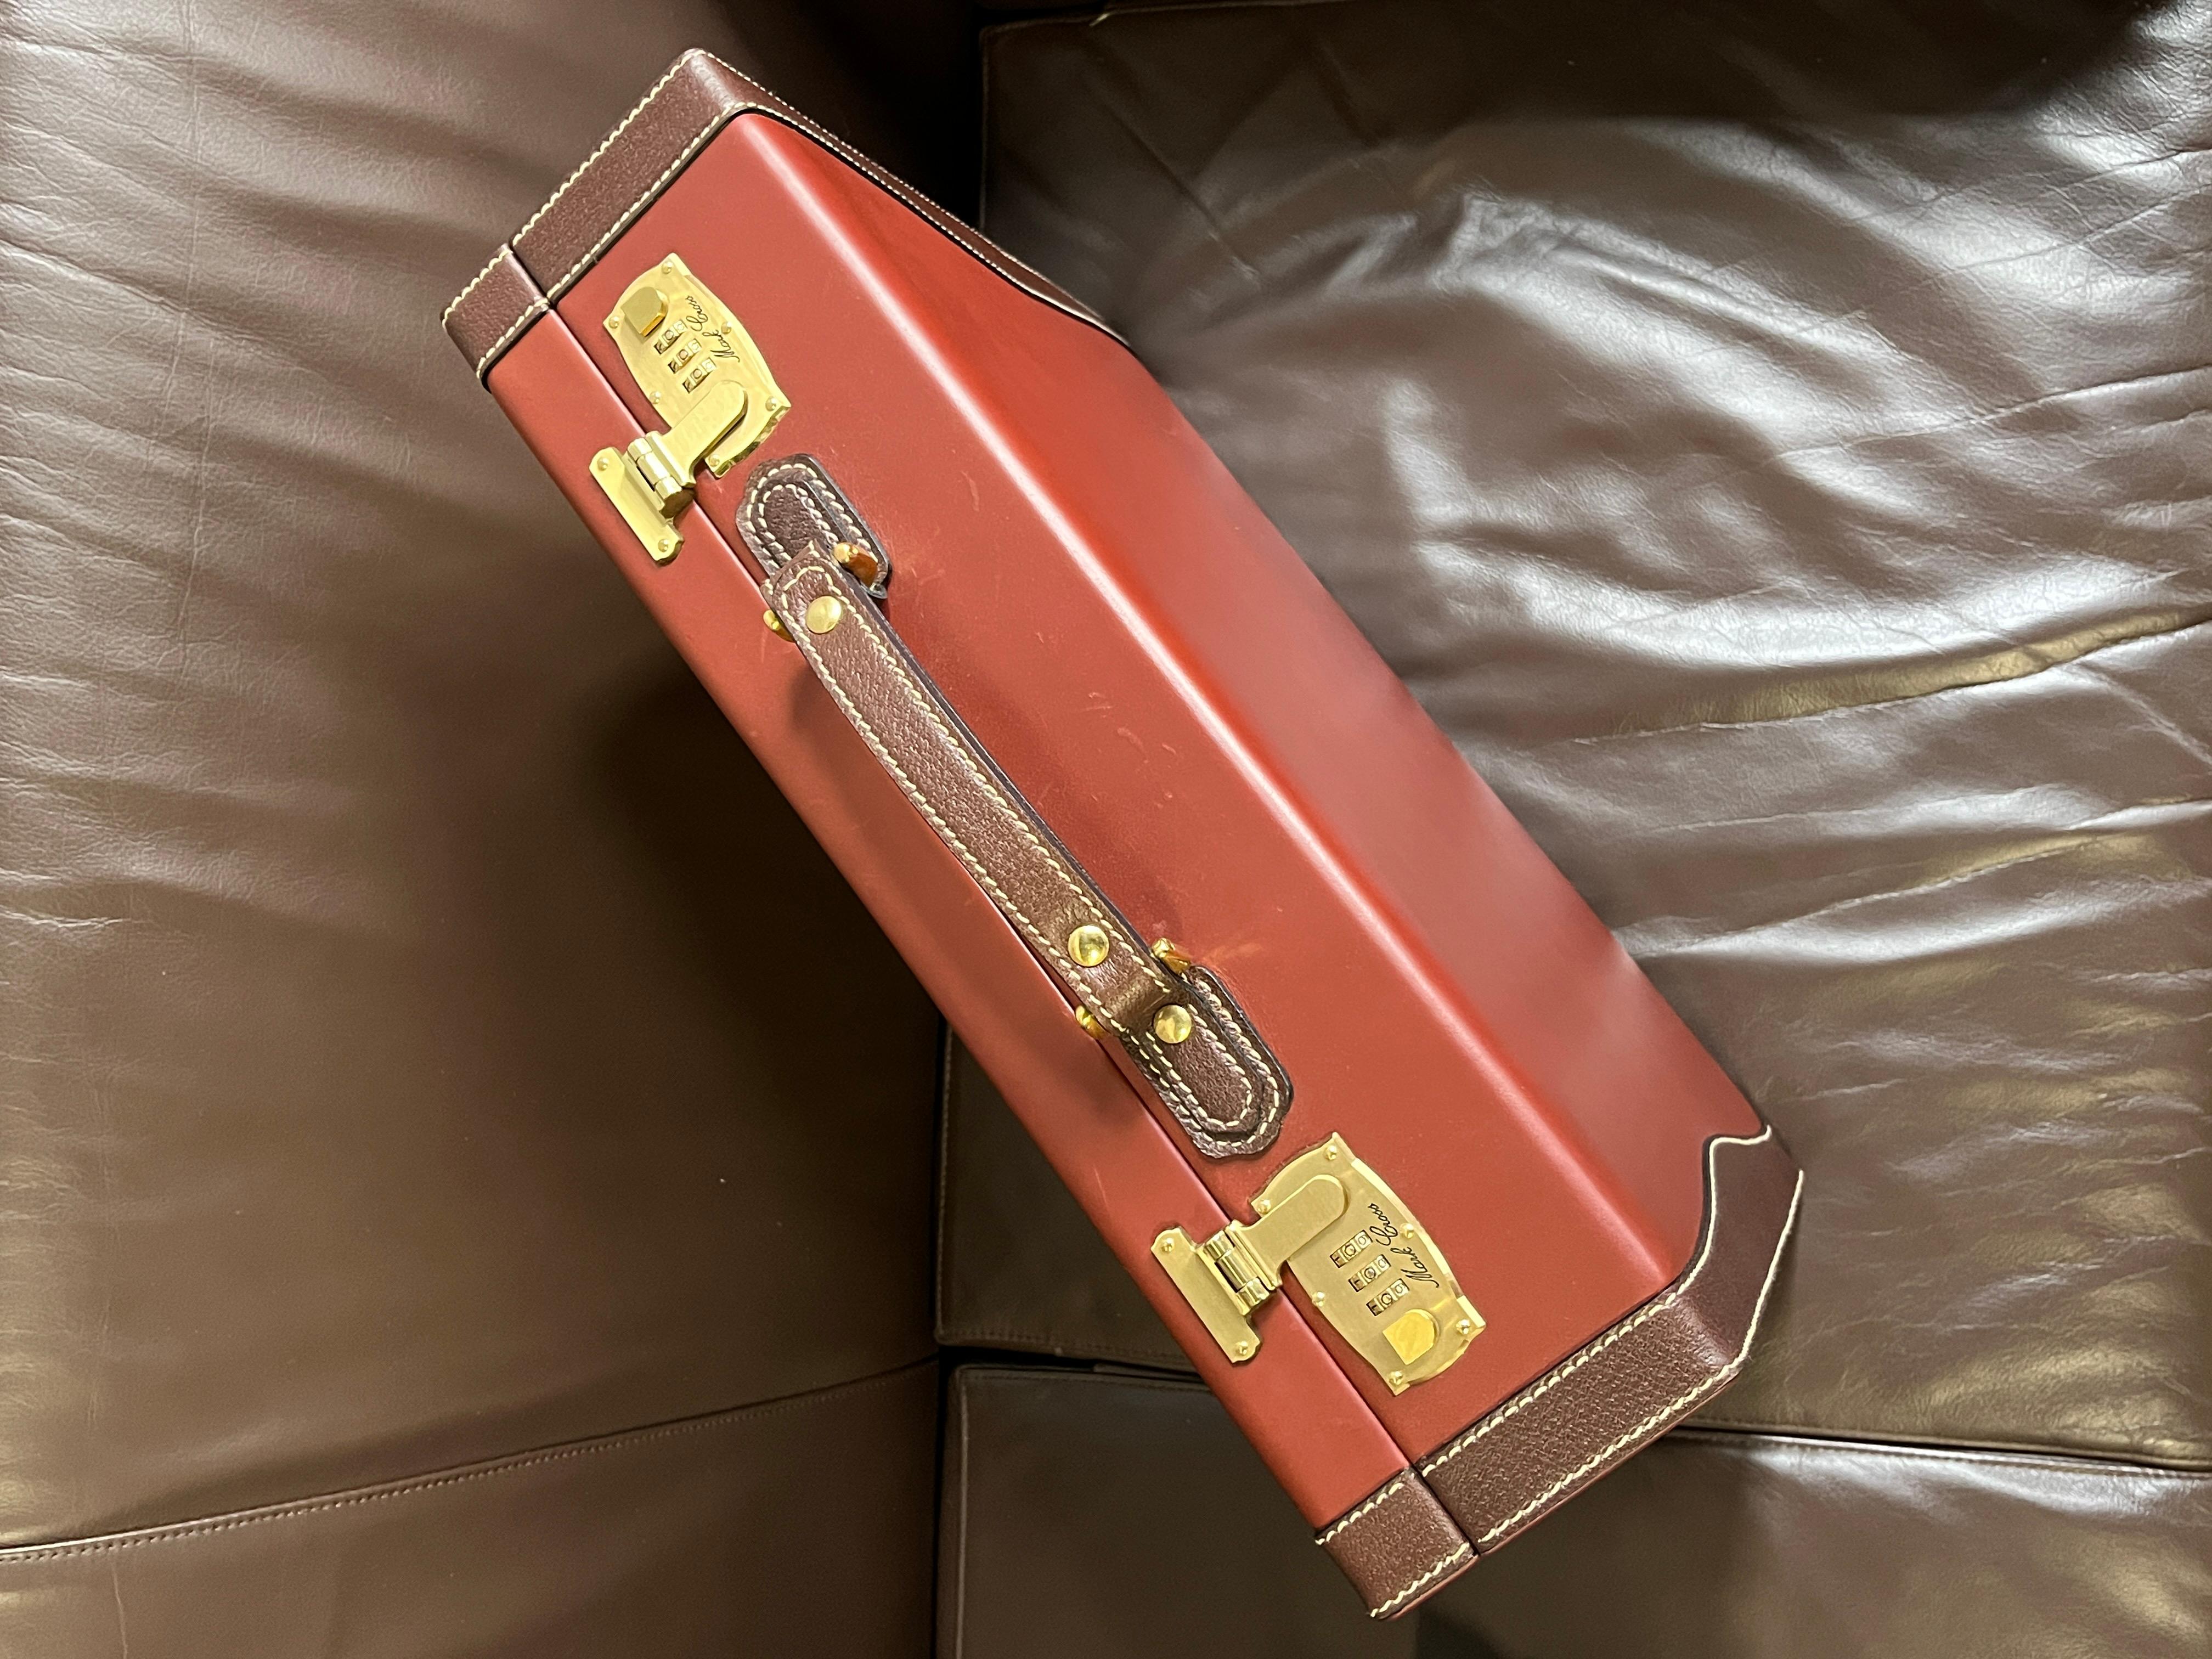 New Old Stock Leather Briefcase Mark Cross 3